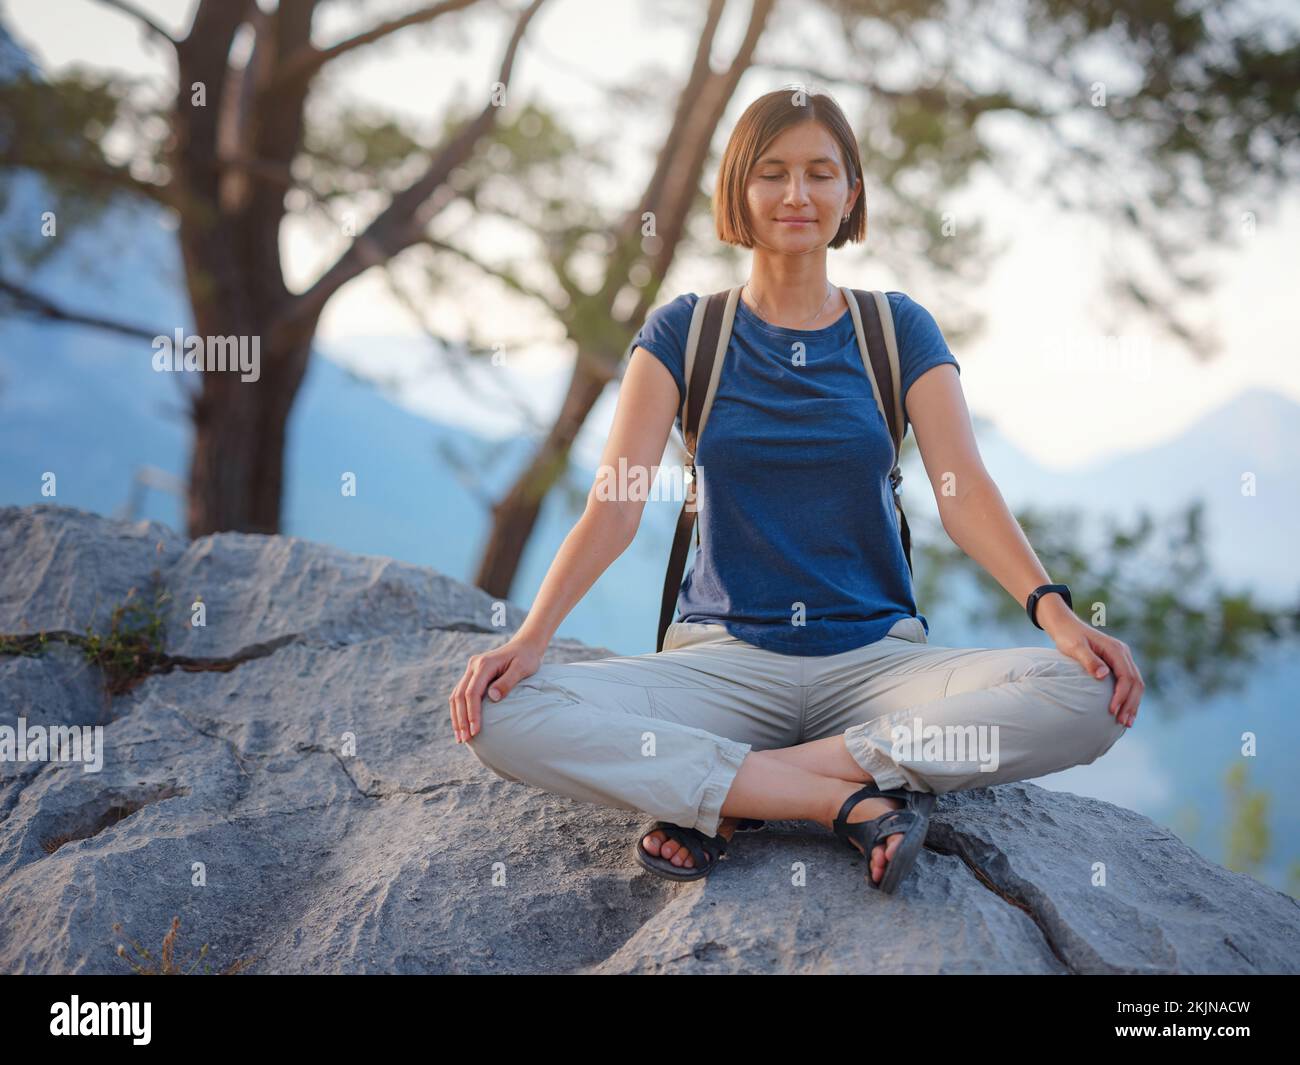 Woman doing yoga in Hawaii mountains. Asian girl meditating in tree pose  with praying hands above head standing on one leg in Kauai, Hawaii, USA.  girl in serene nature landscape. Stock Photo